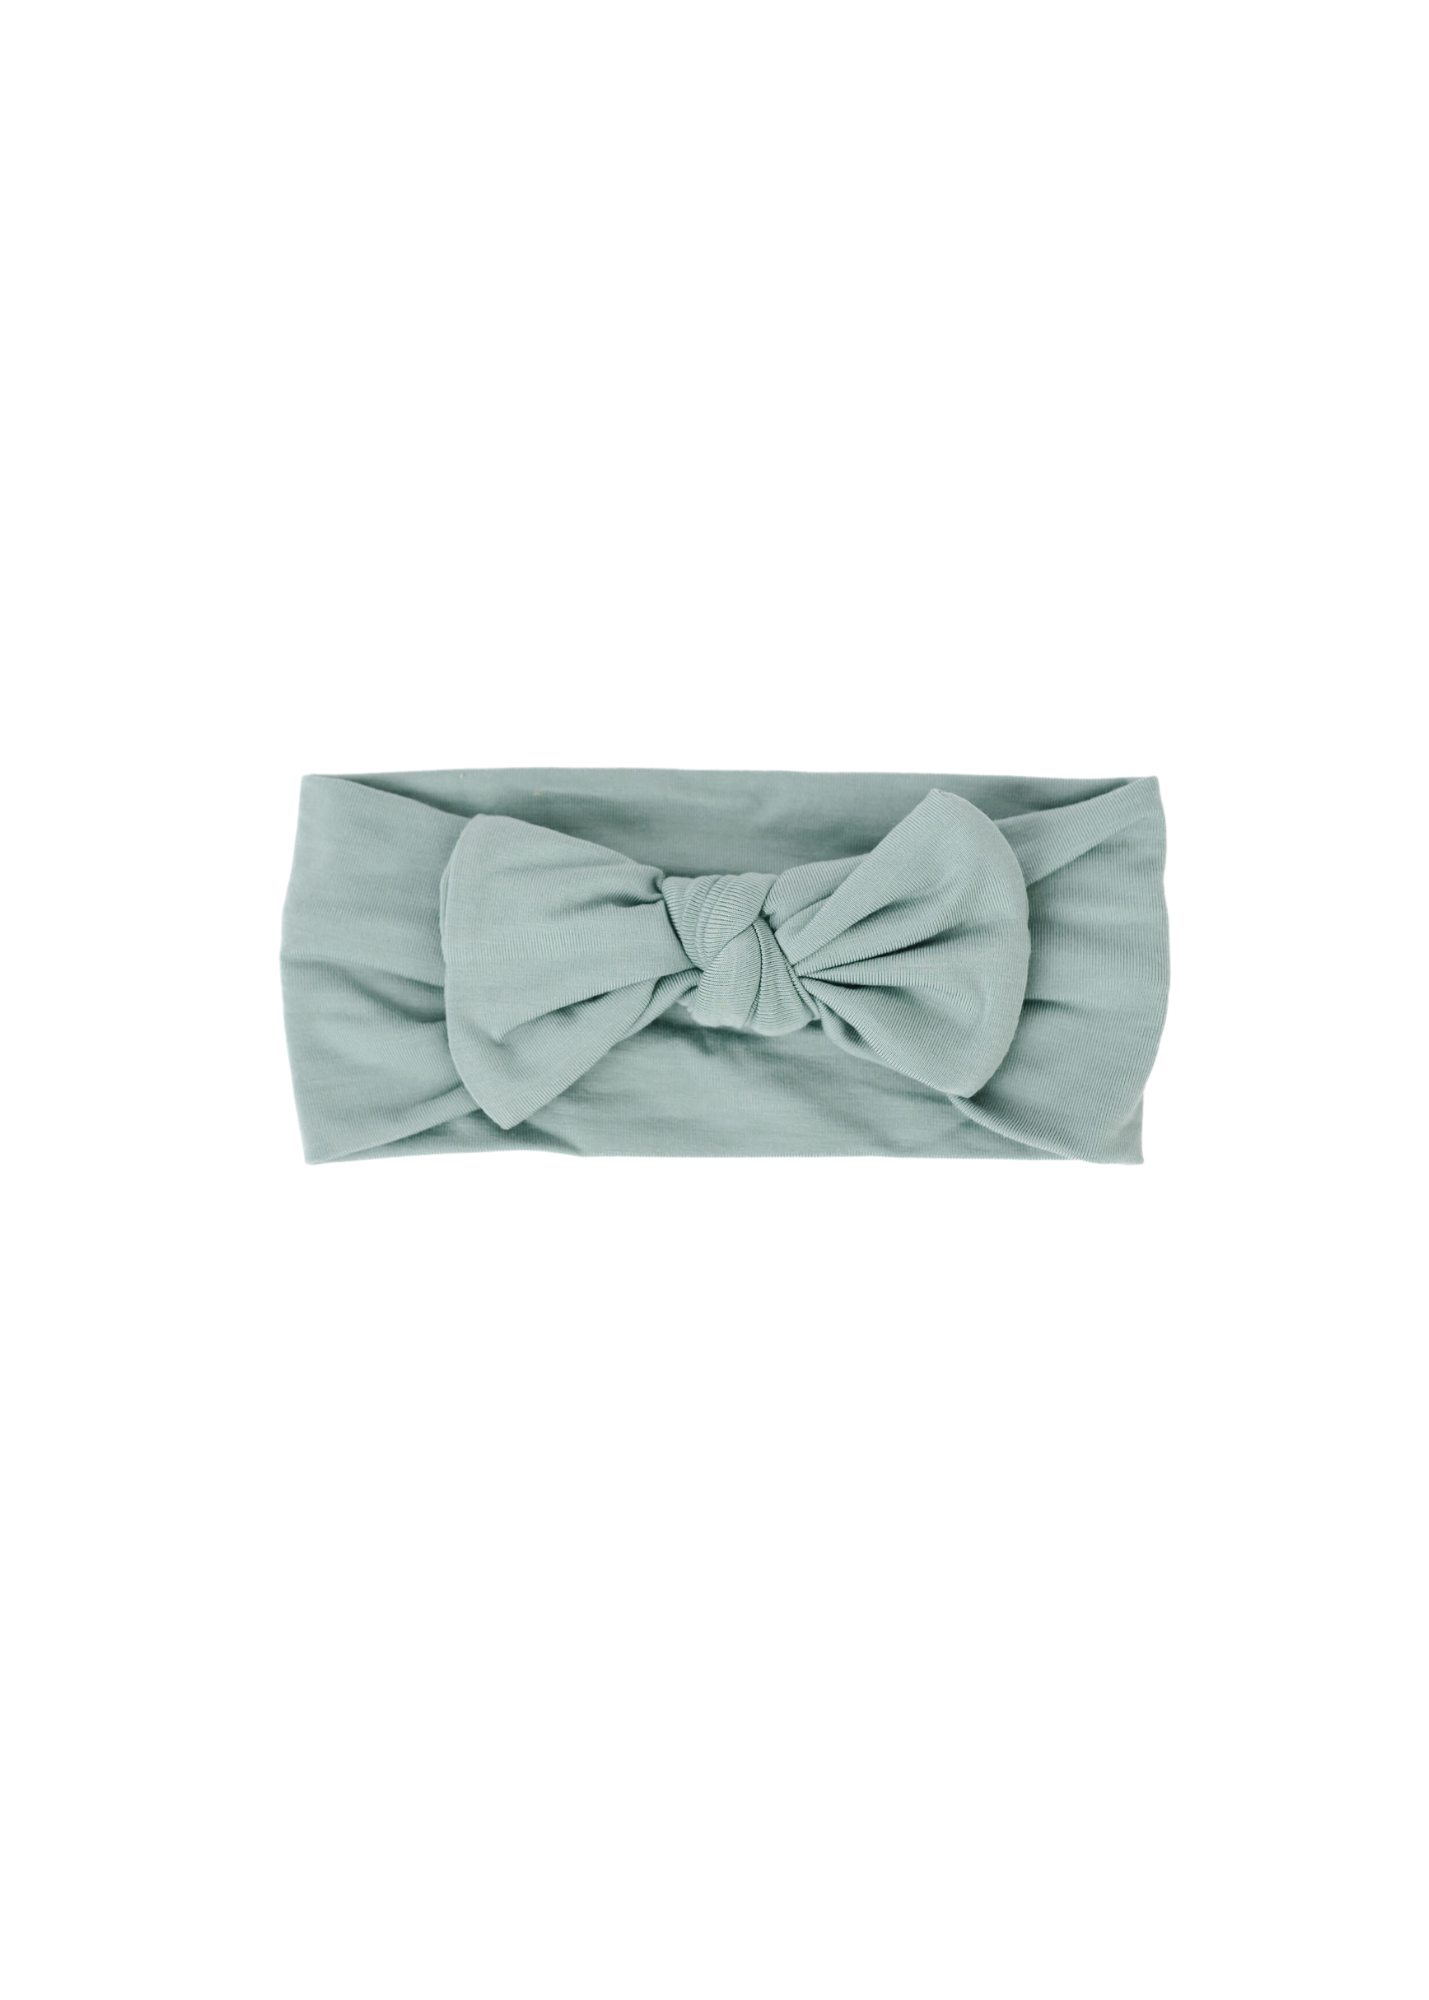 Emerald City Solid Color Hair Bow